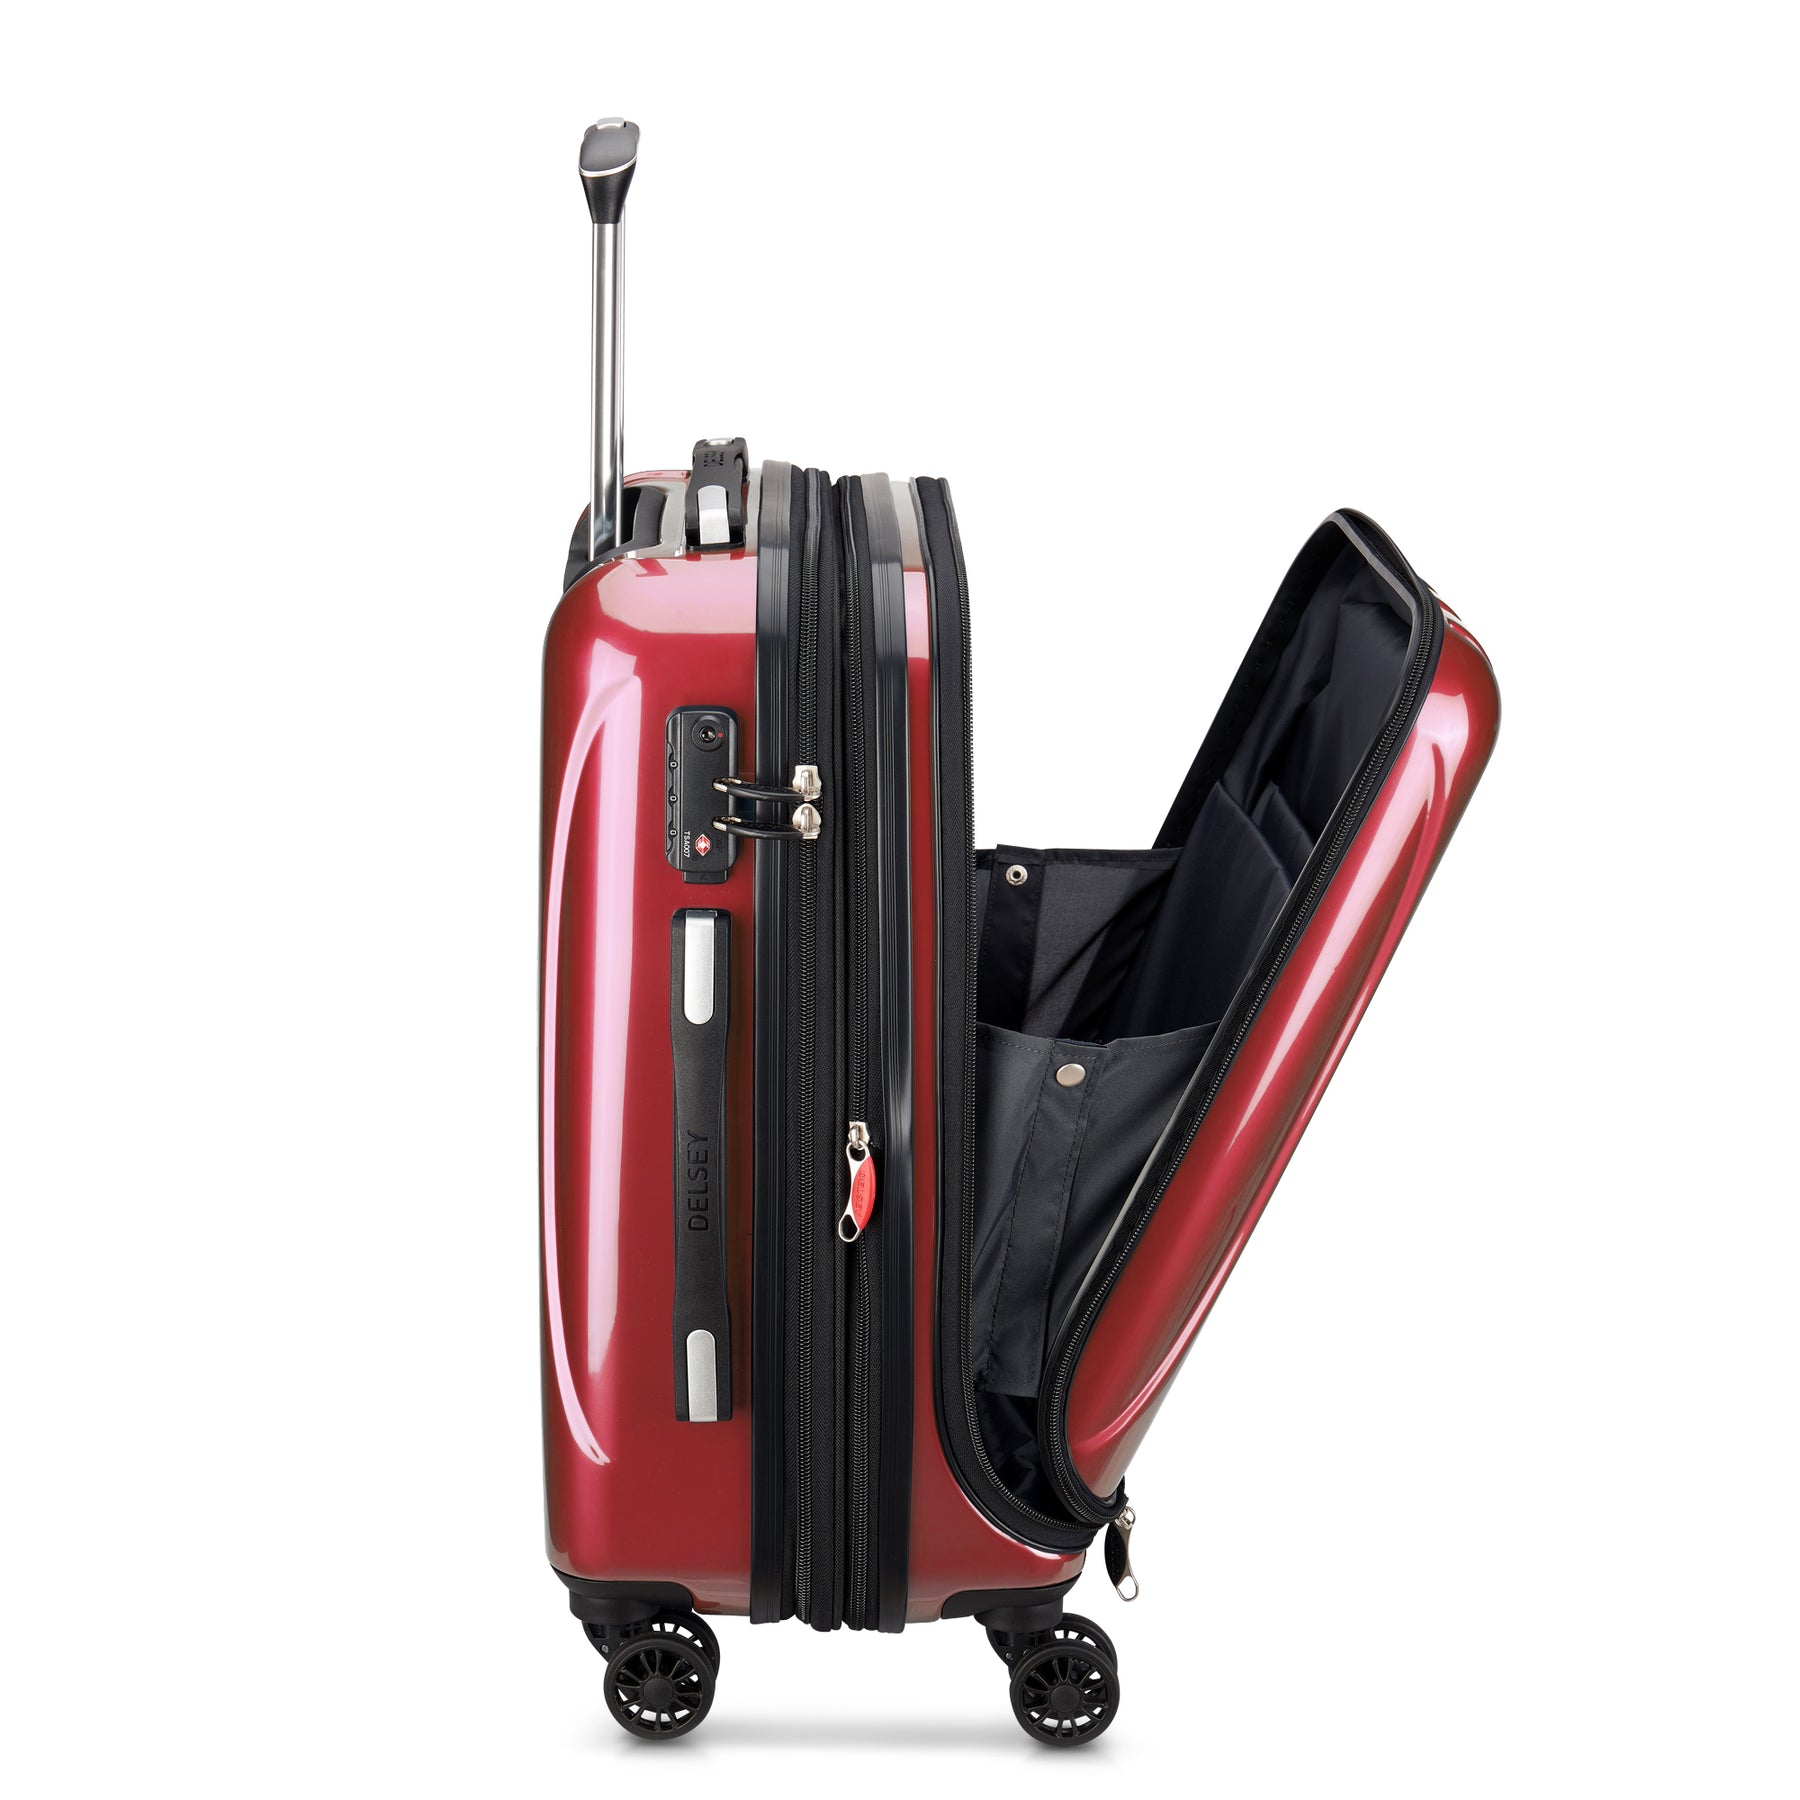 DELSEY PARIS Helium Aero 19" Hardside Expandable Spinner Carry-On Luggage, Red - image 4 of 8